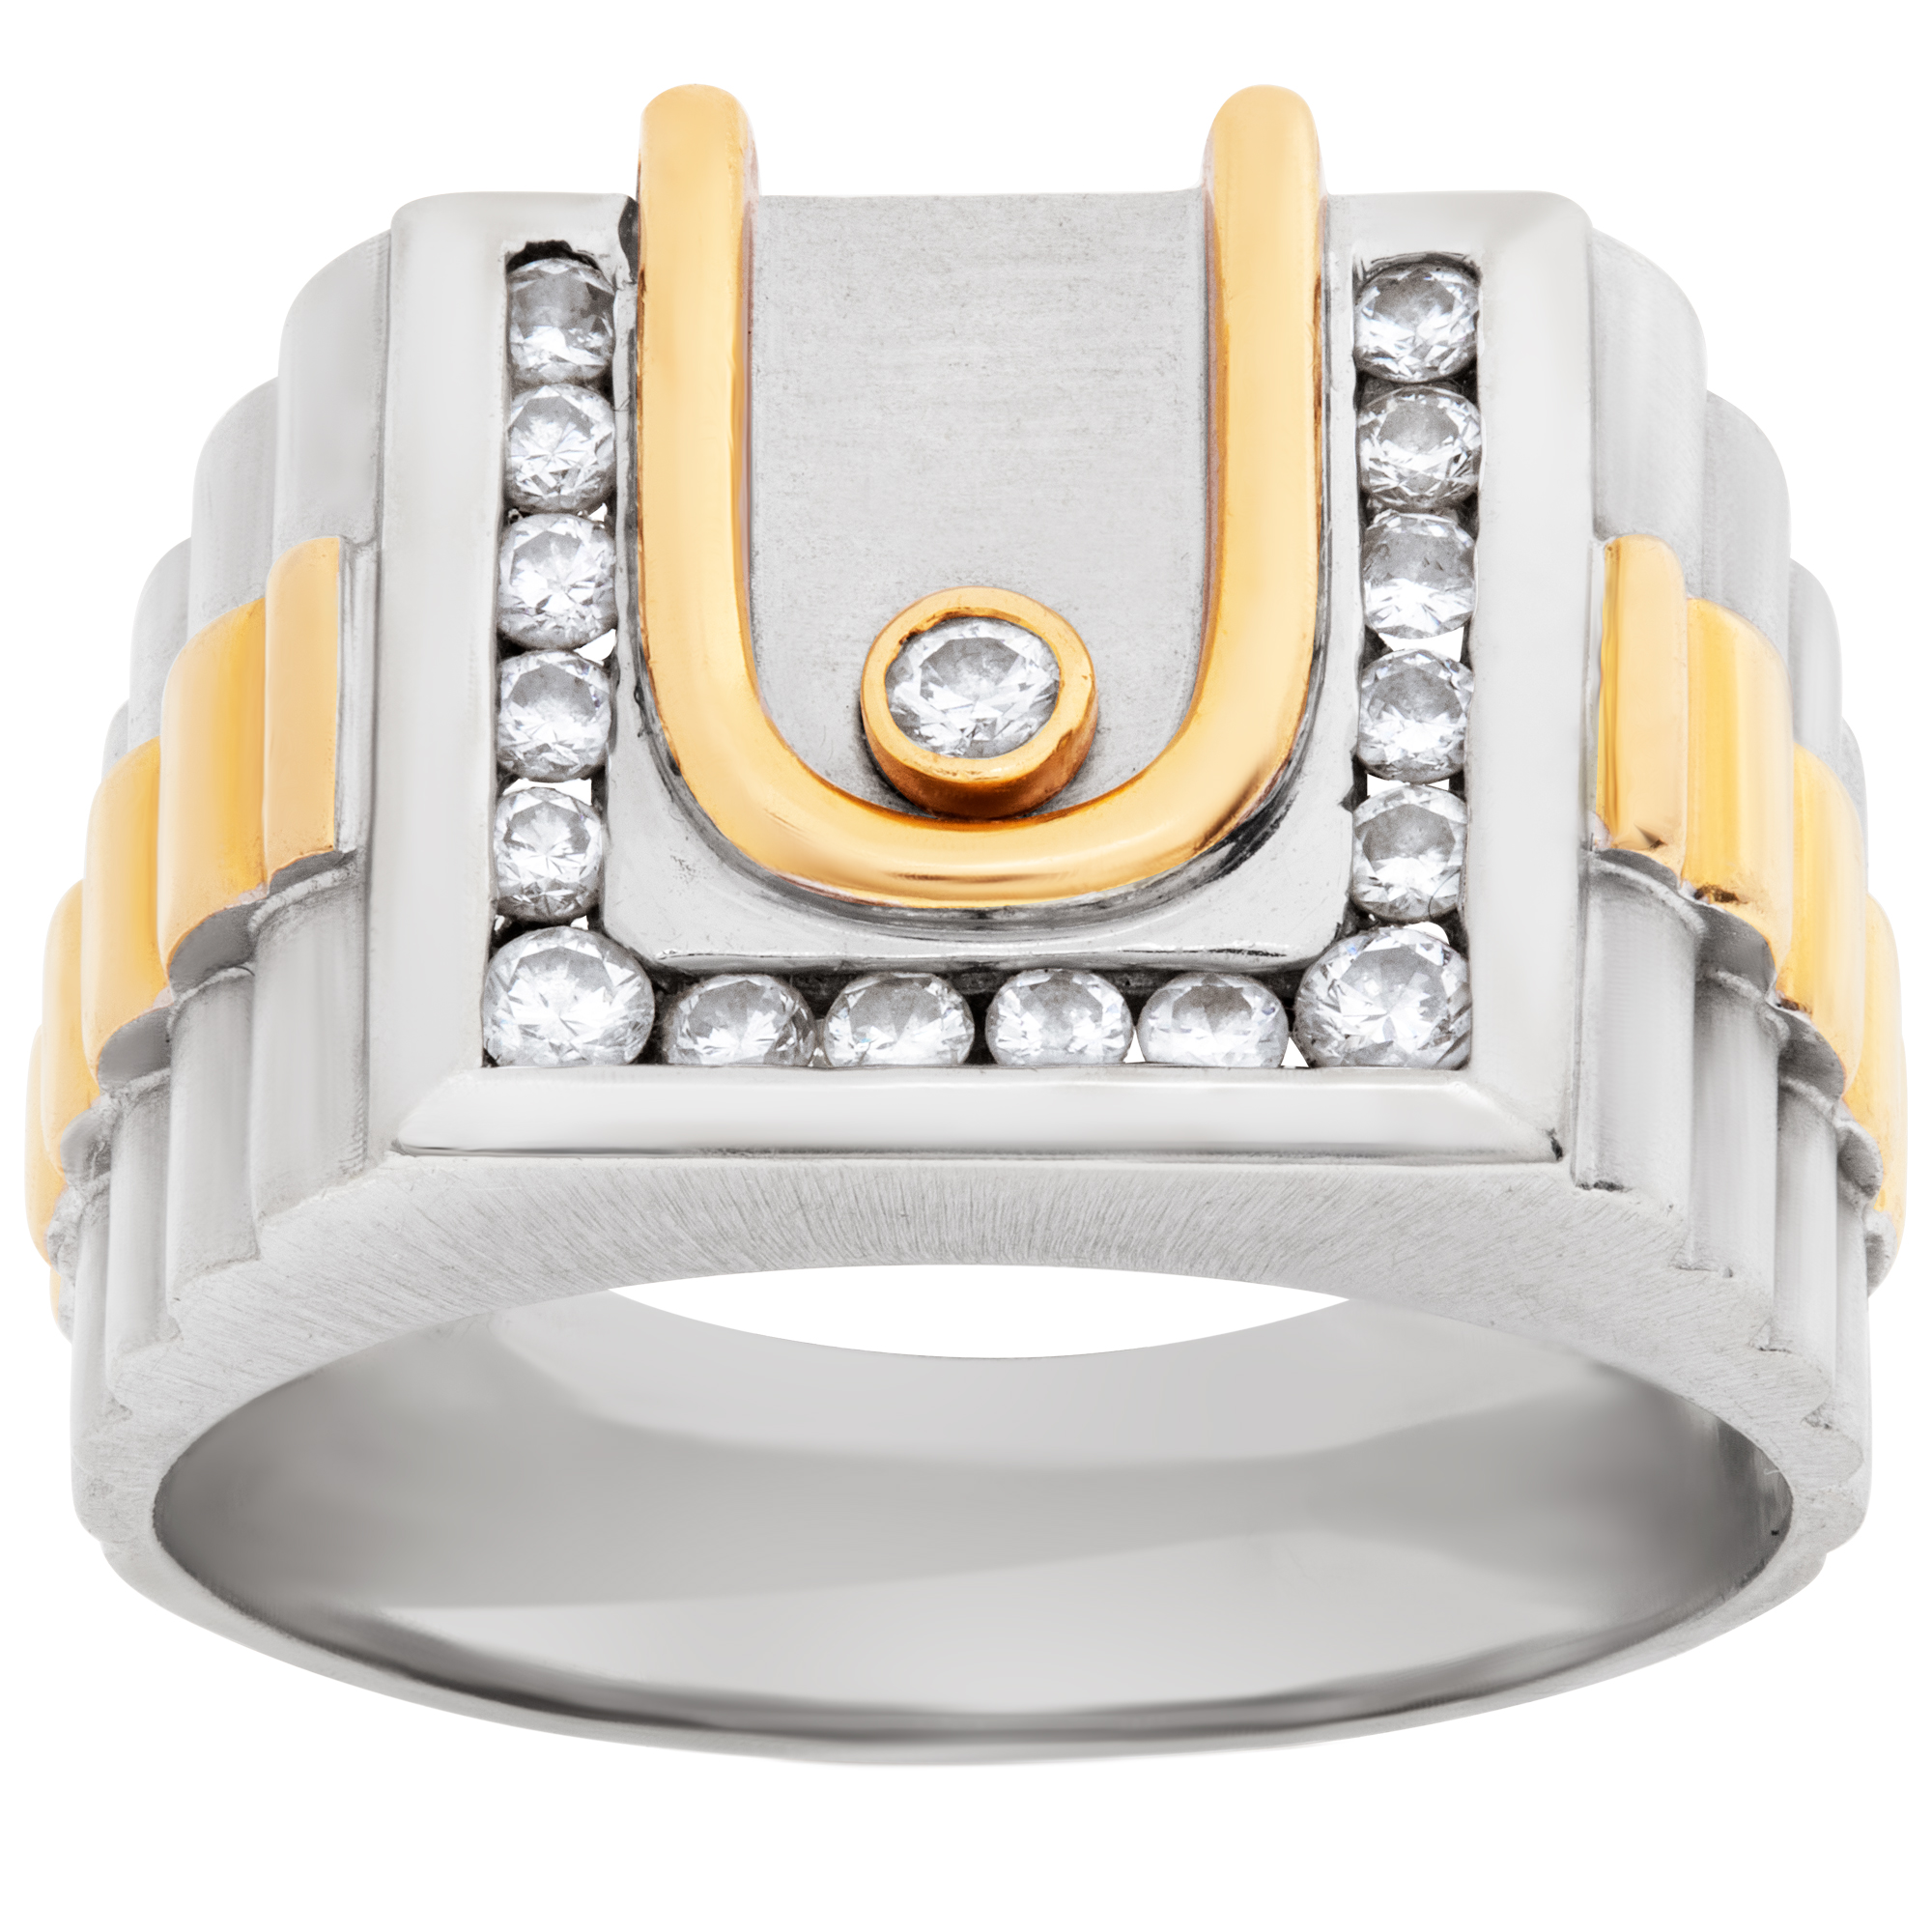 Men's ring in 18k with diamond accents